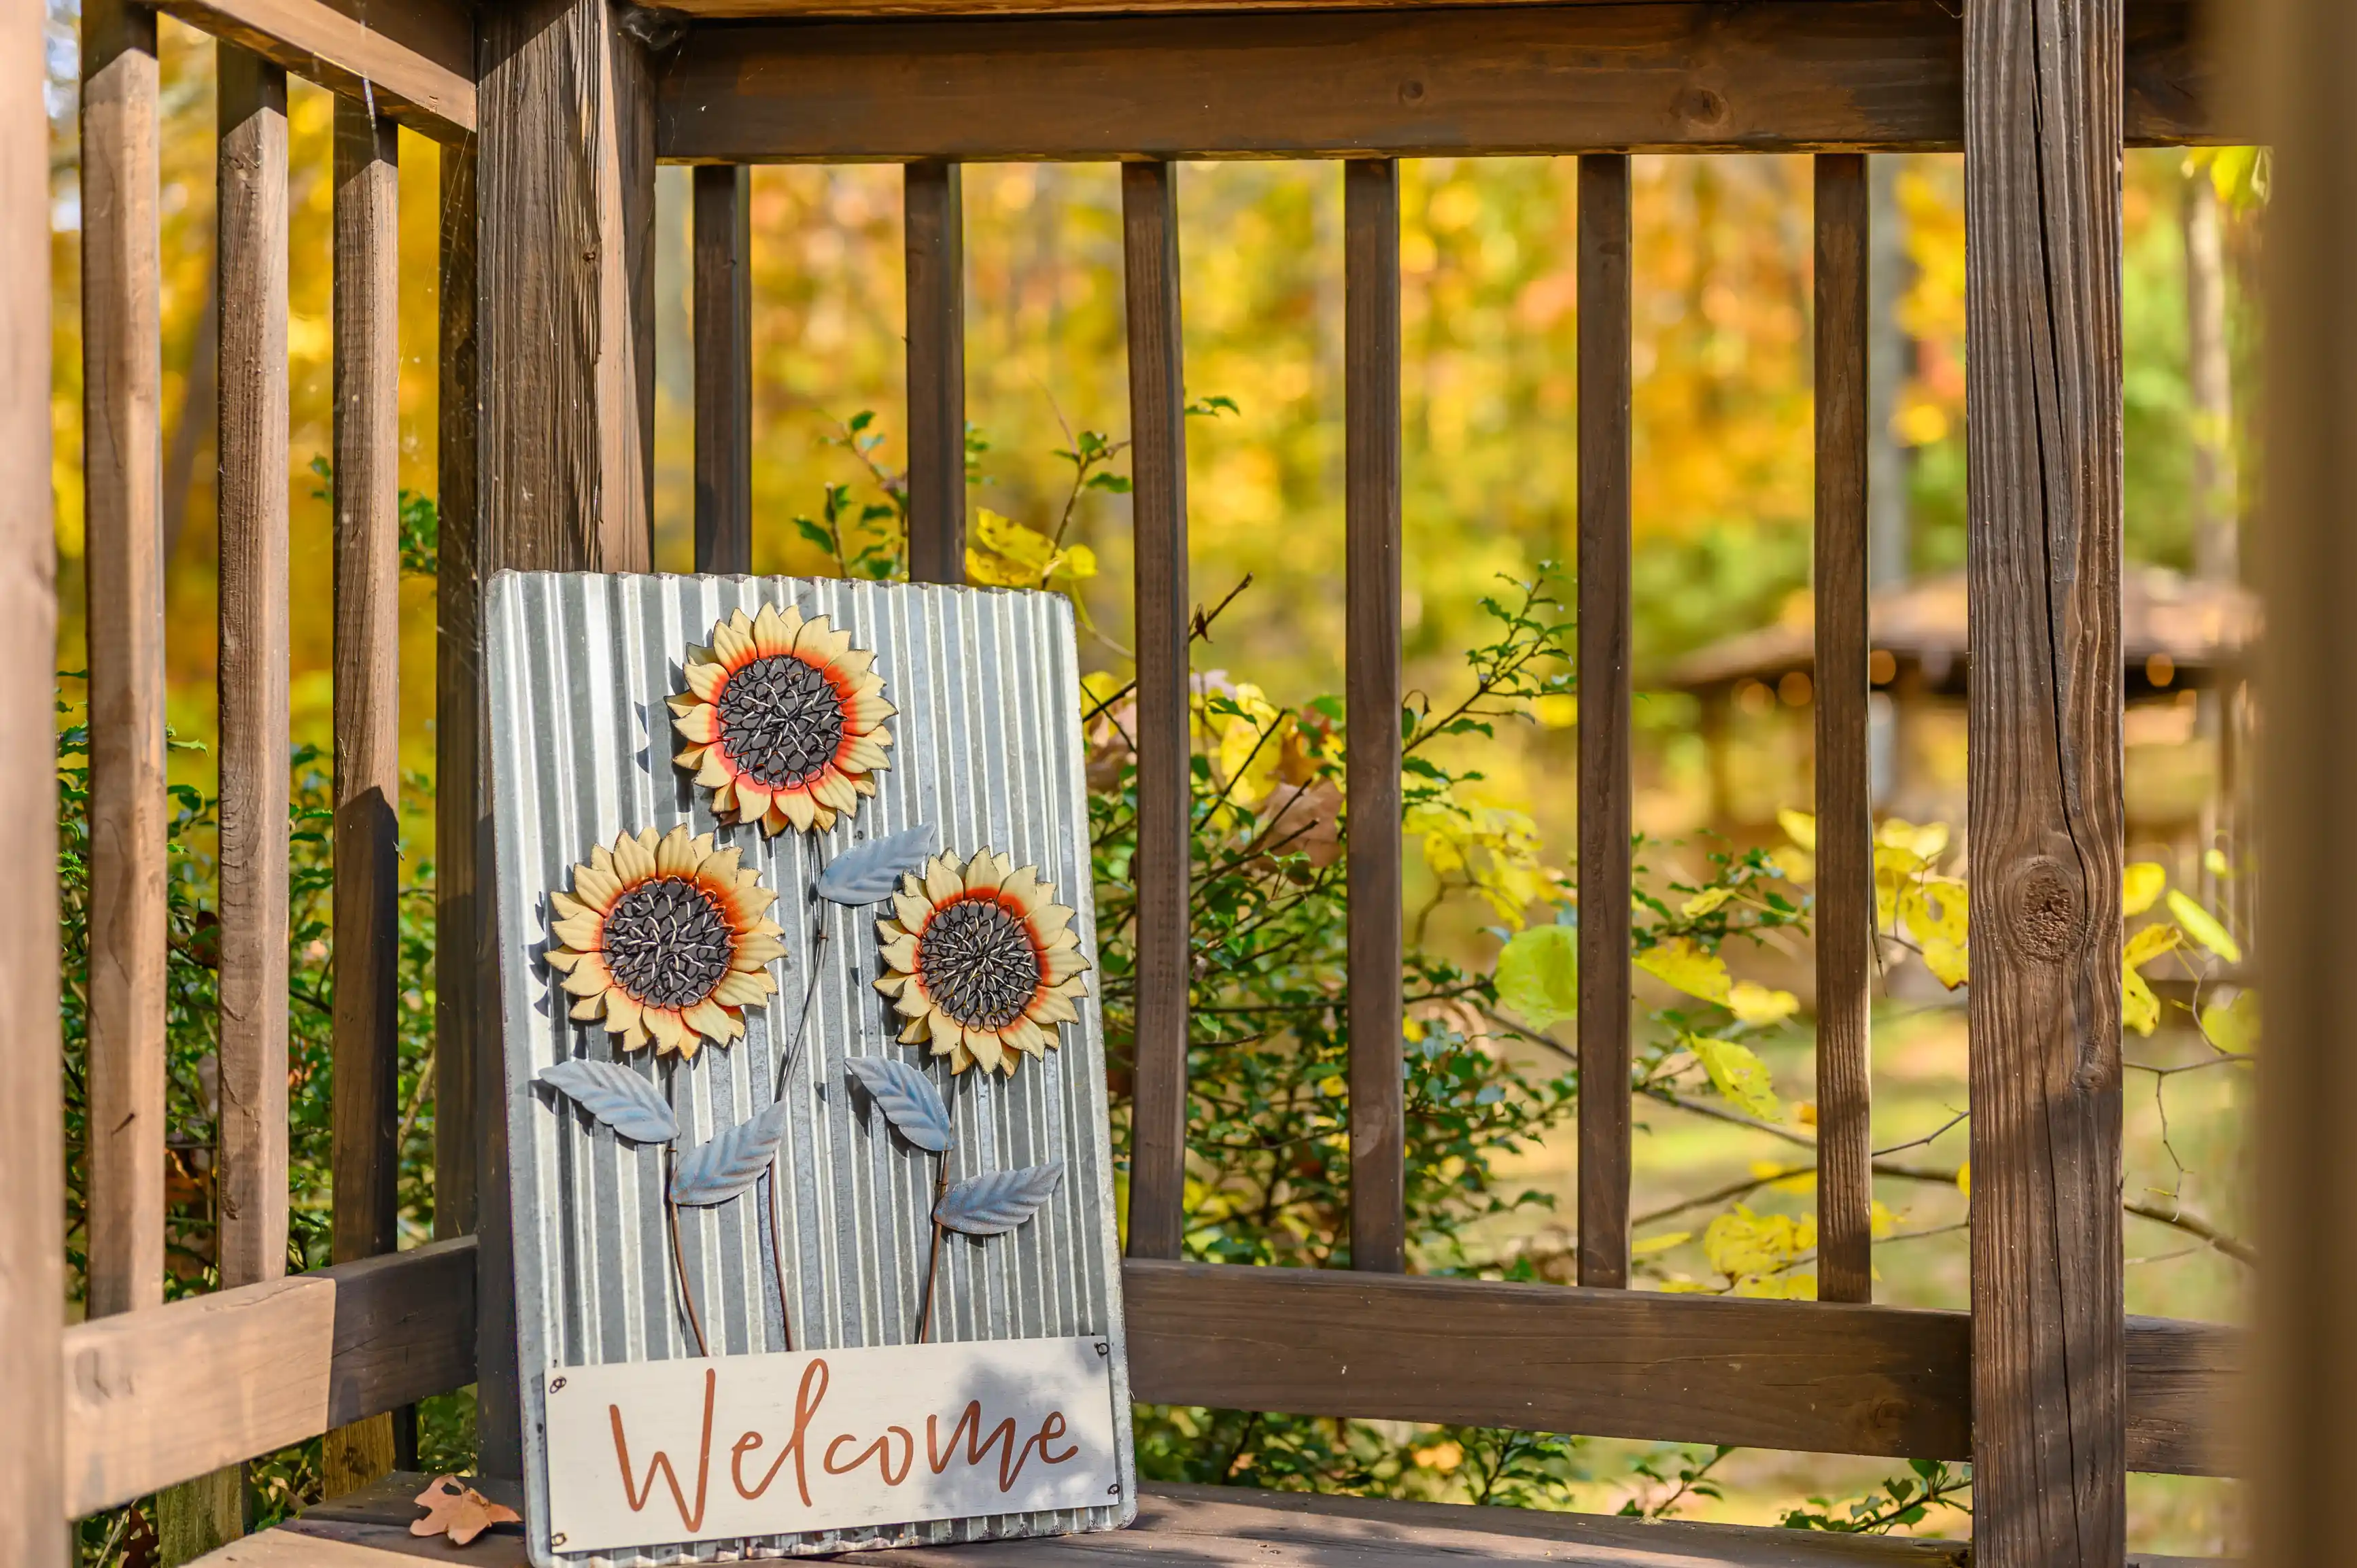 Decorative welcome sign with sunflower design on a wooden porch with autumn leaves in the background.